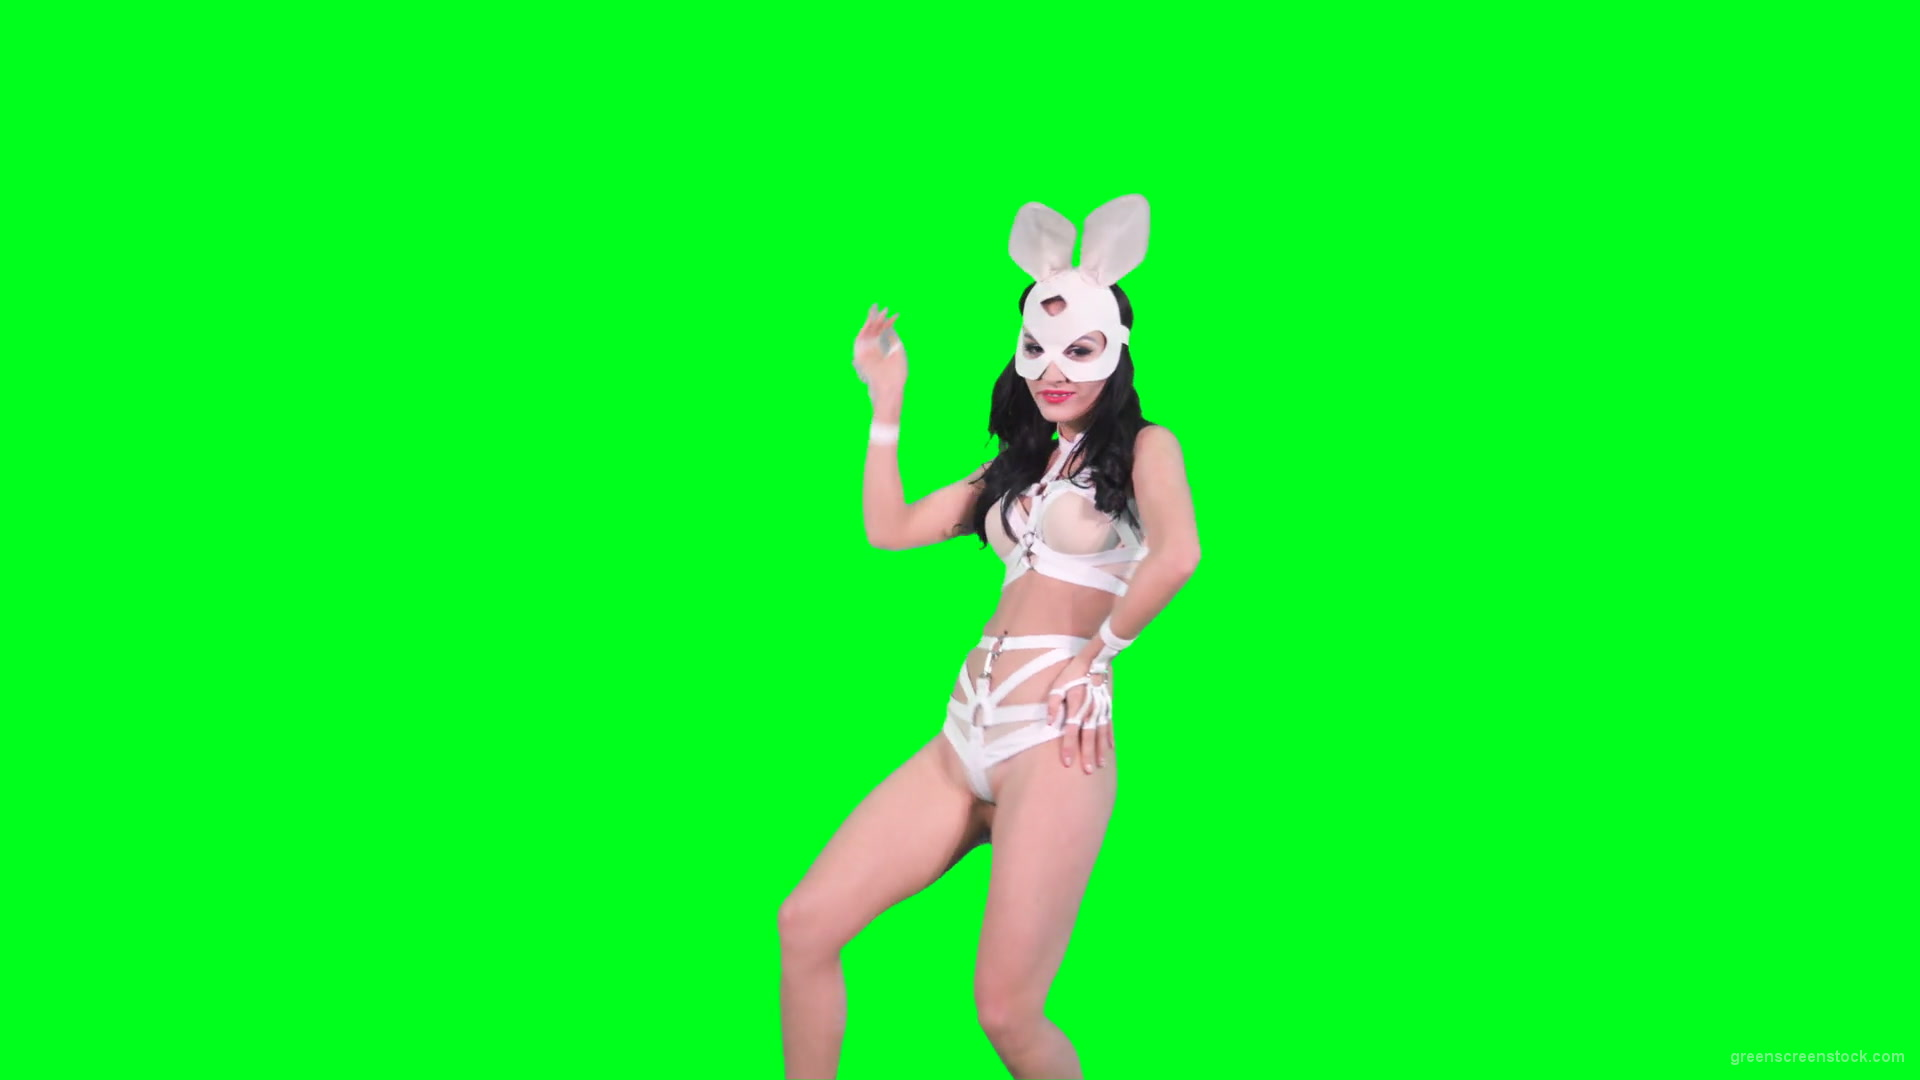 Girl-in-rabbit-bunny-mask-posing-and-show-gestures-on-green-screen-4K-Video-Footage-1920_008 Green Screen Stock